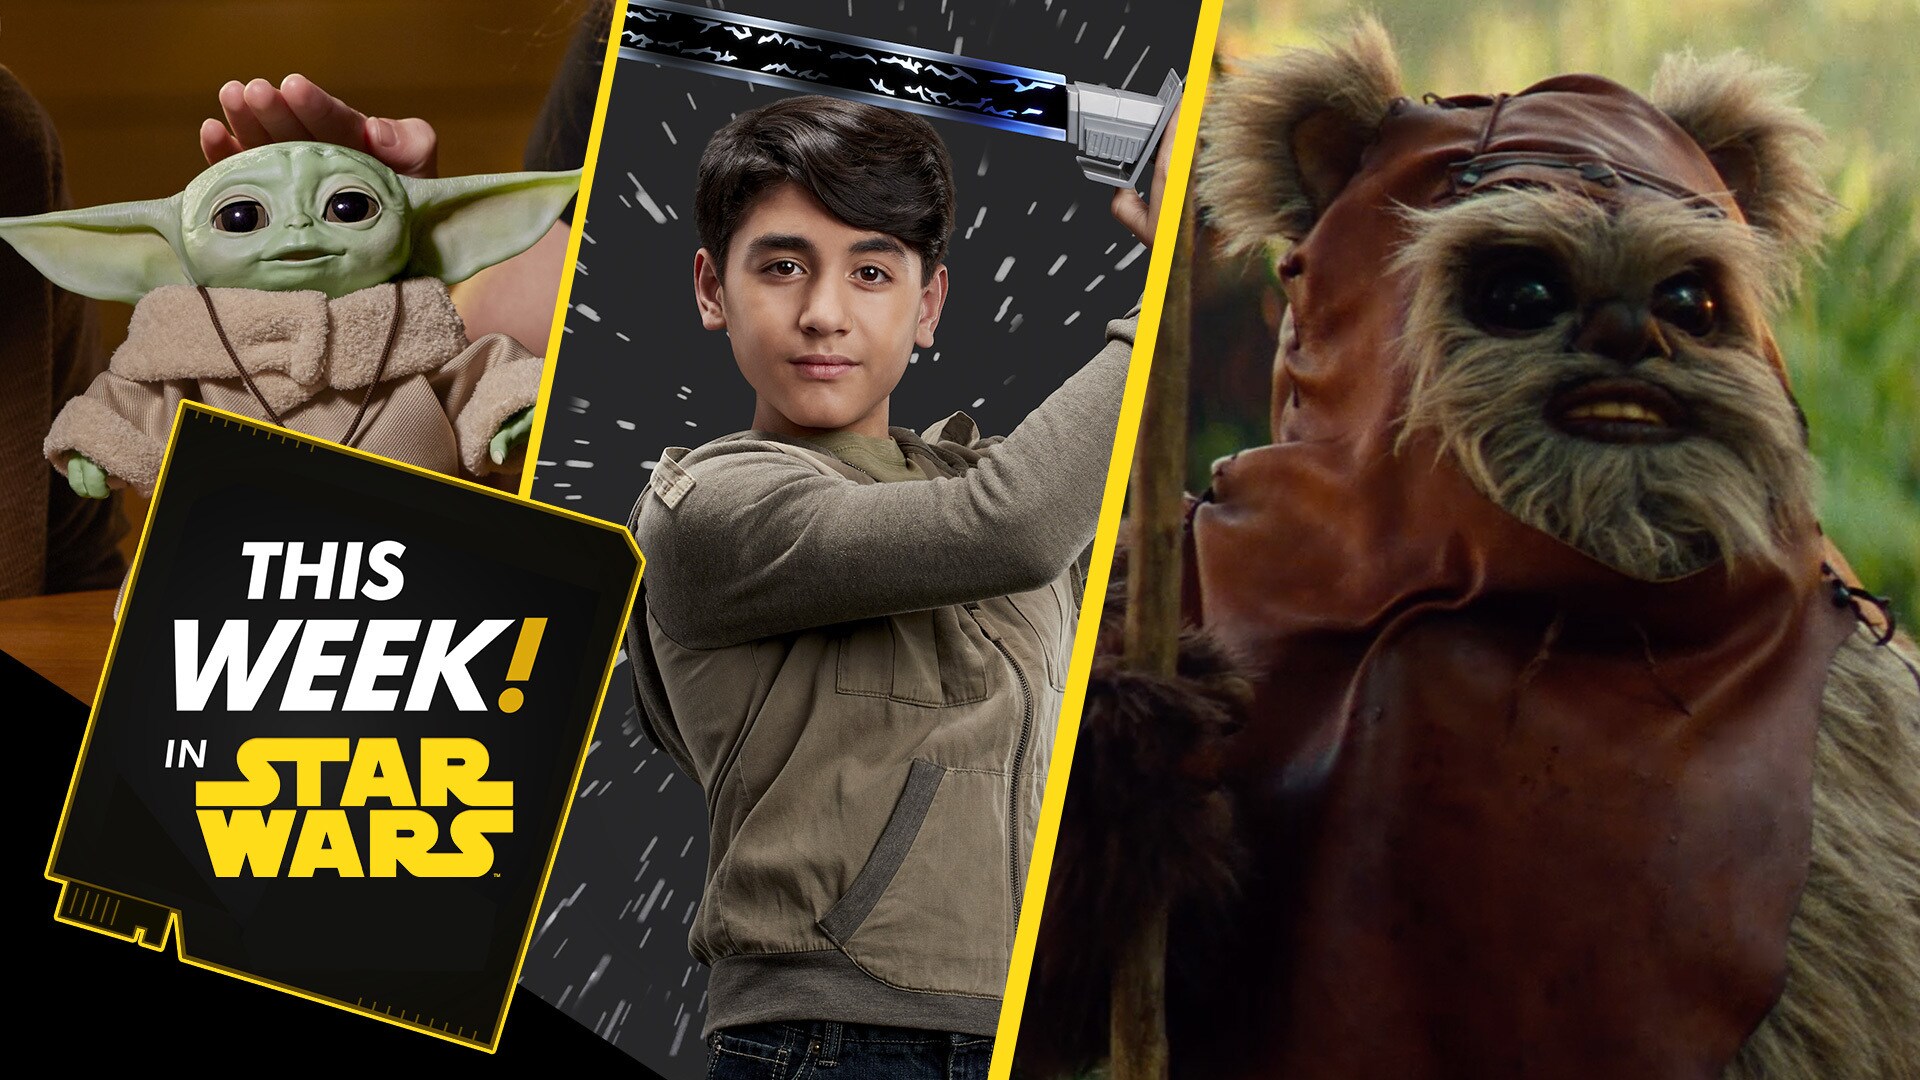 Star Wars: The Rise of Skywalker Comes Home, the Child Lands at New York Toy Fair, and More!